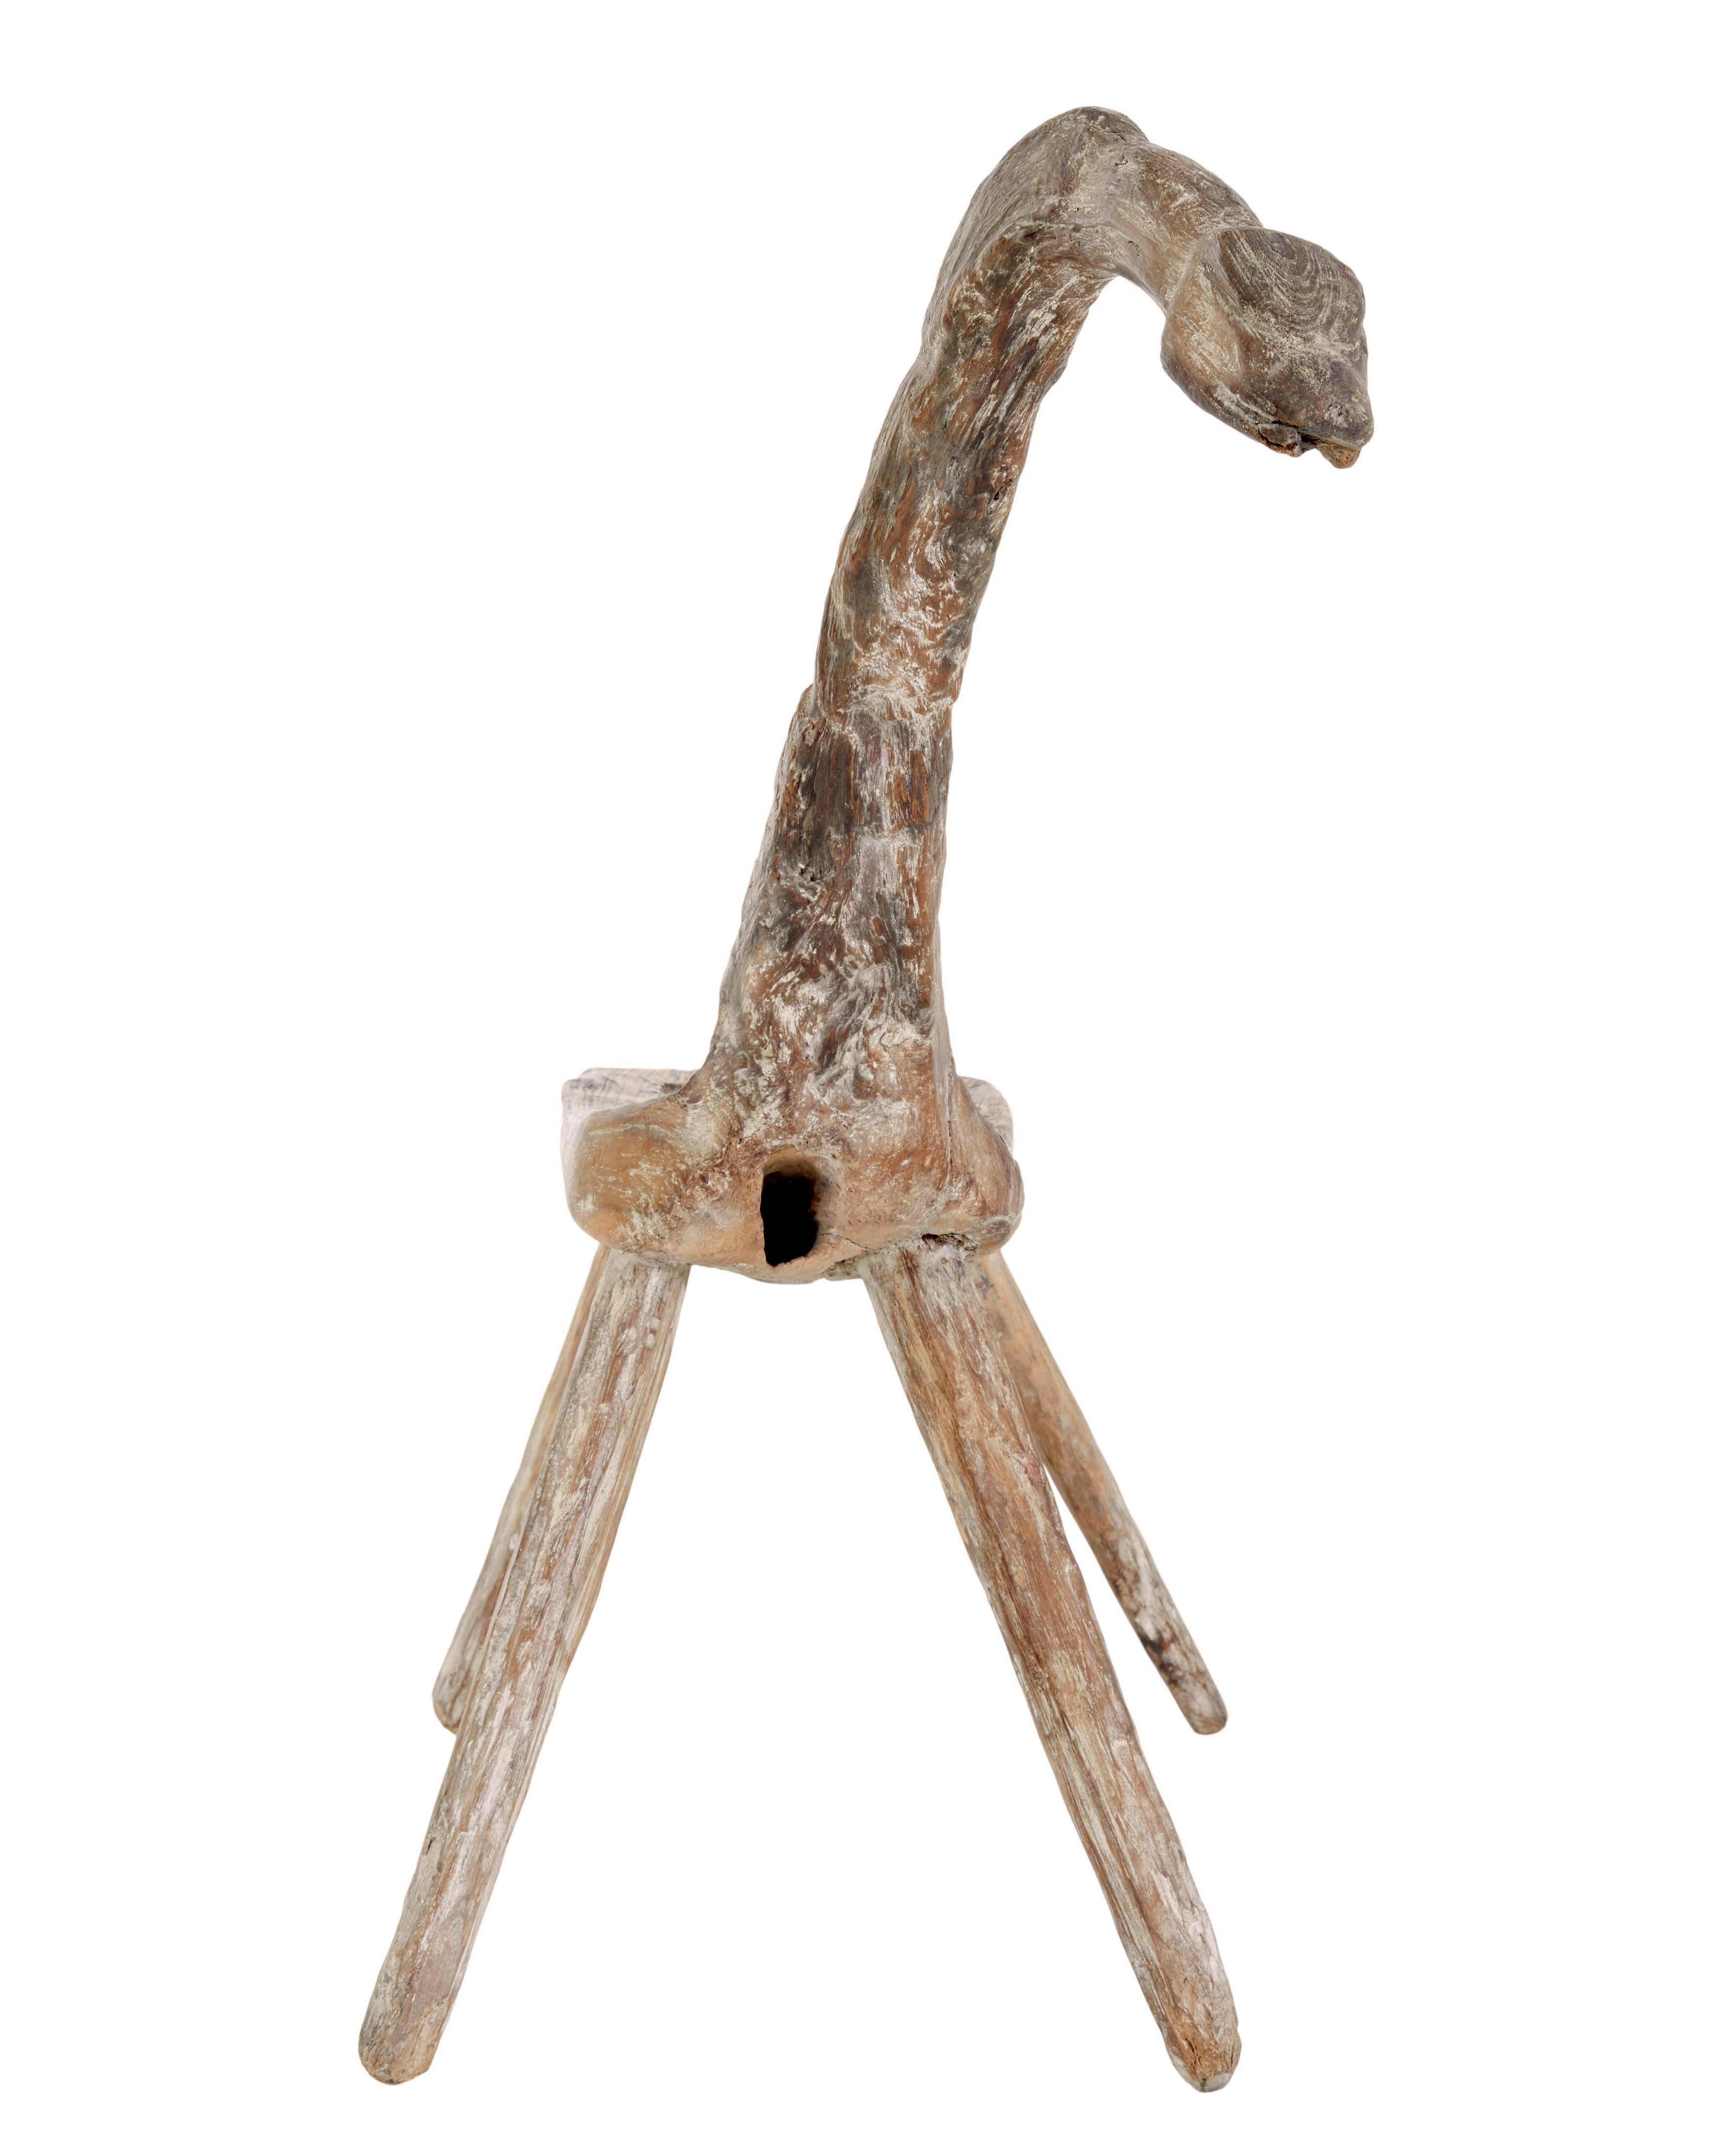 
Unique 19th century natural form oak childs stool circa 1880.

Rare children's stool in the form of a long necked bird, horse or dinosaur, made from oak in its natural shape, with doweled in legs.

More of a decorative piece than for everyday